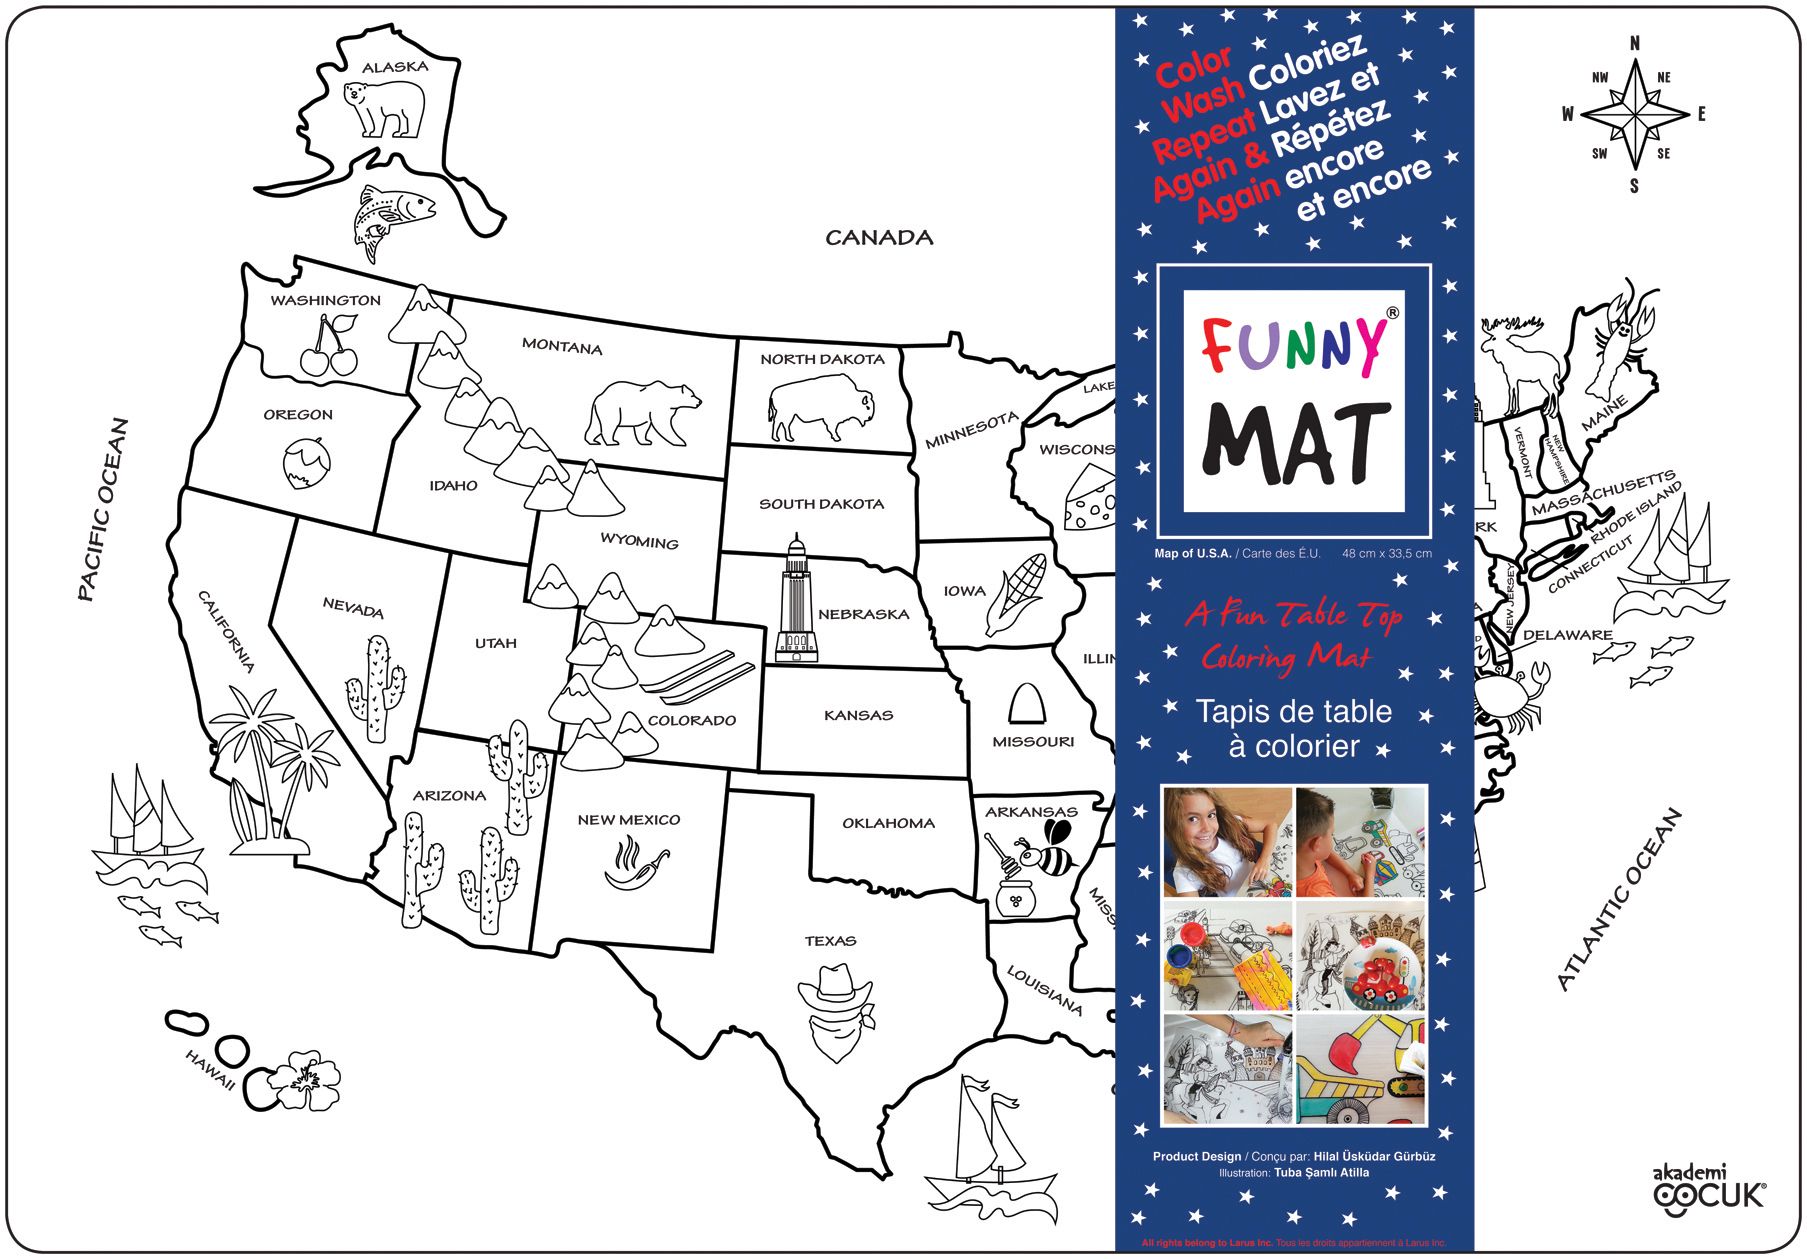 Funny MAT A Fun Table Top Coloring Mat - USA (White, Single) - Blesket Canada